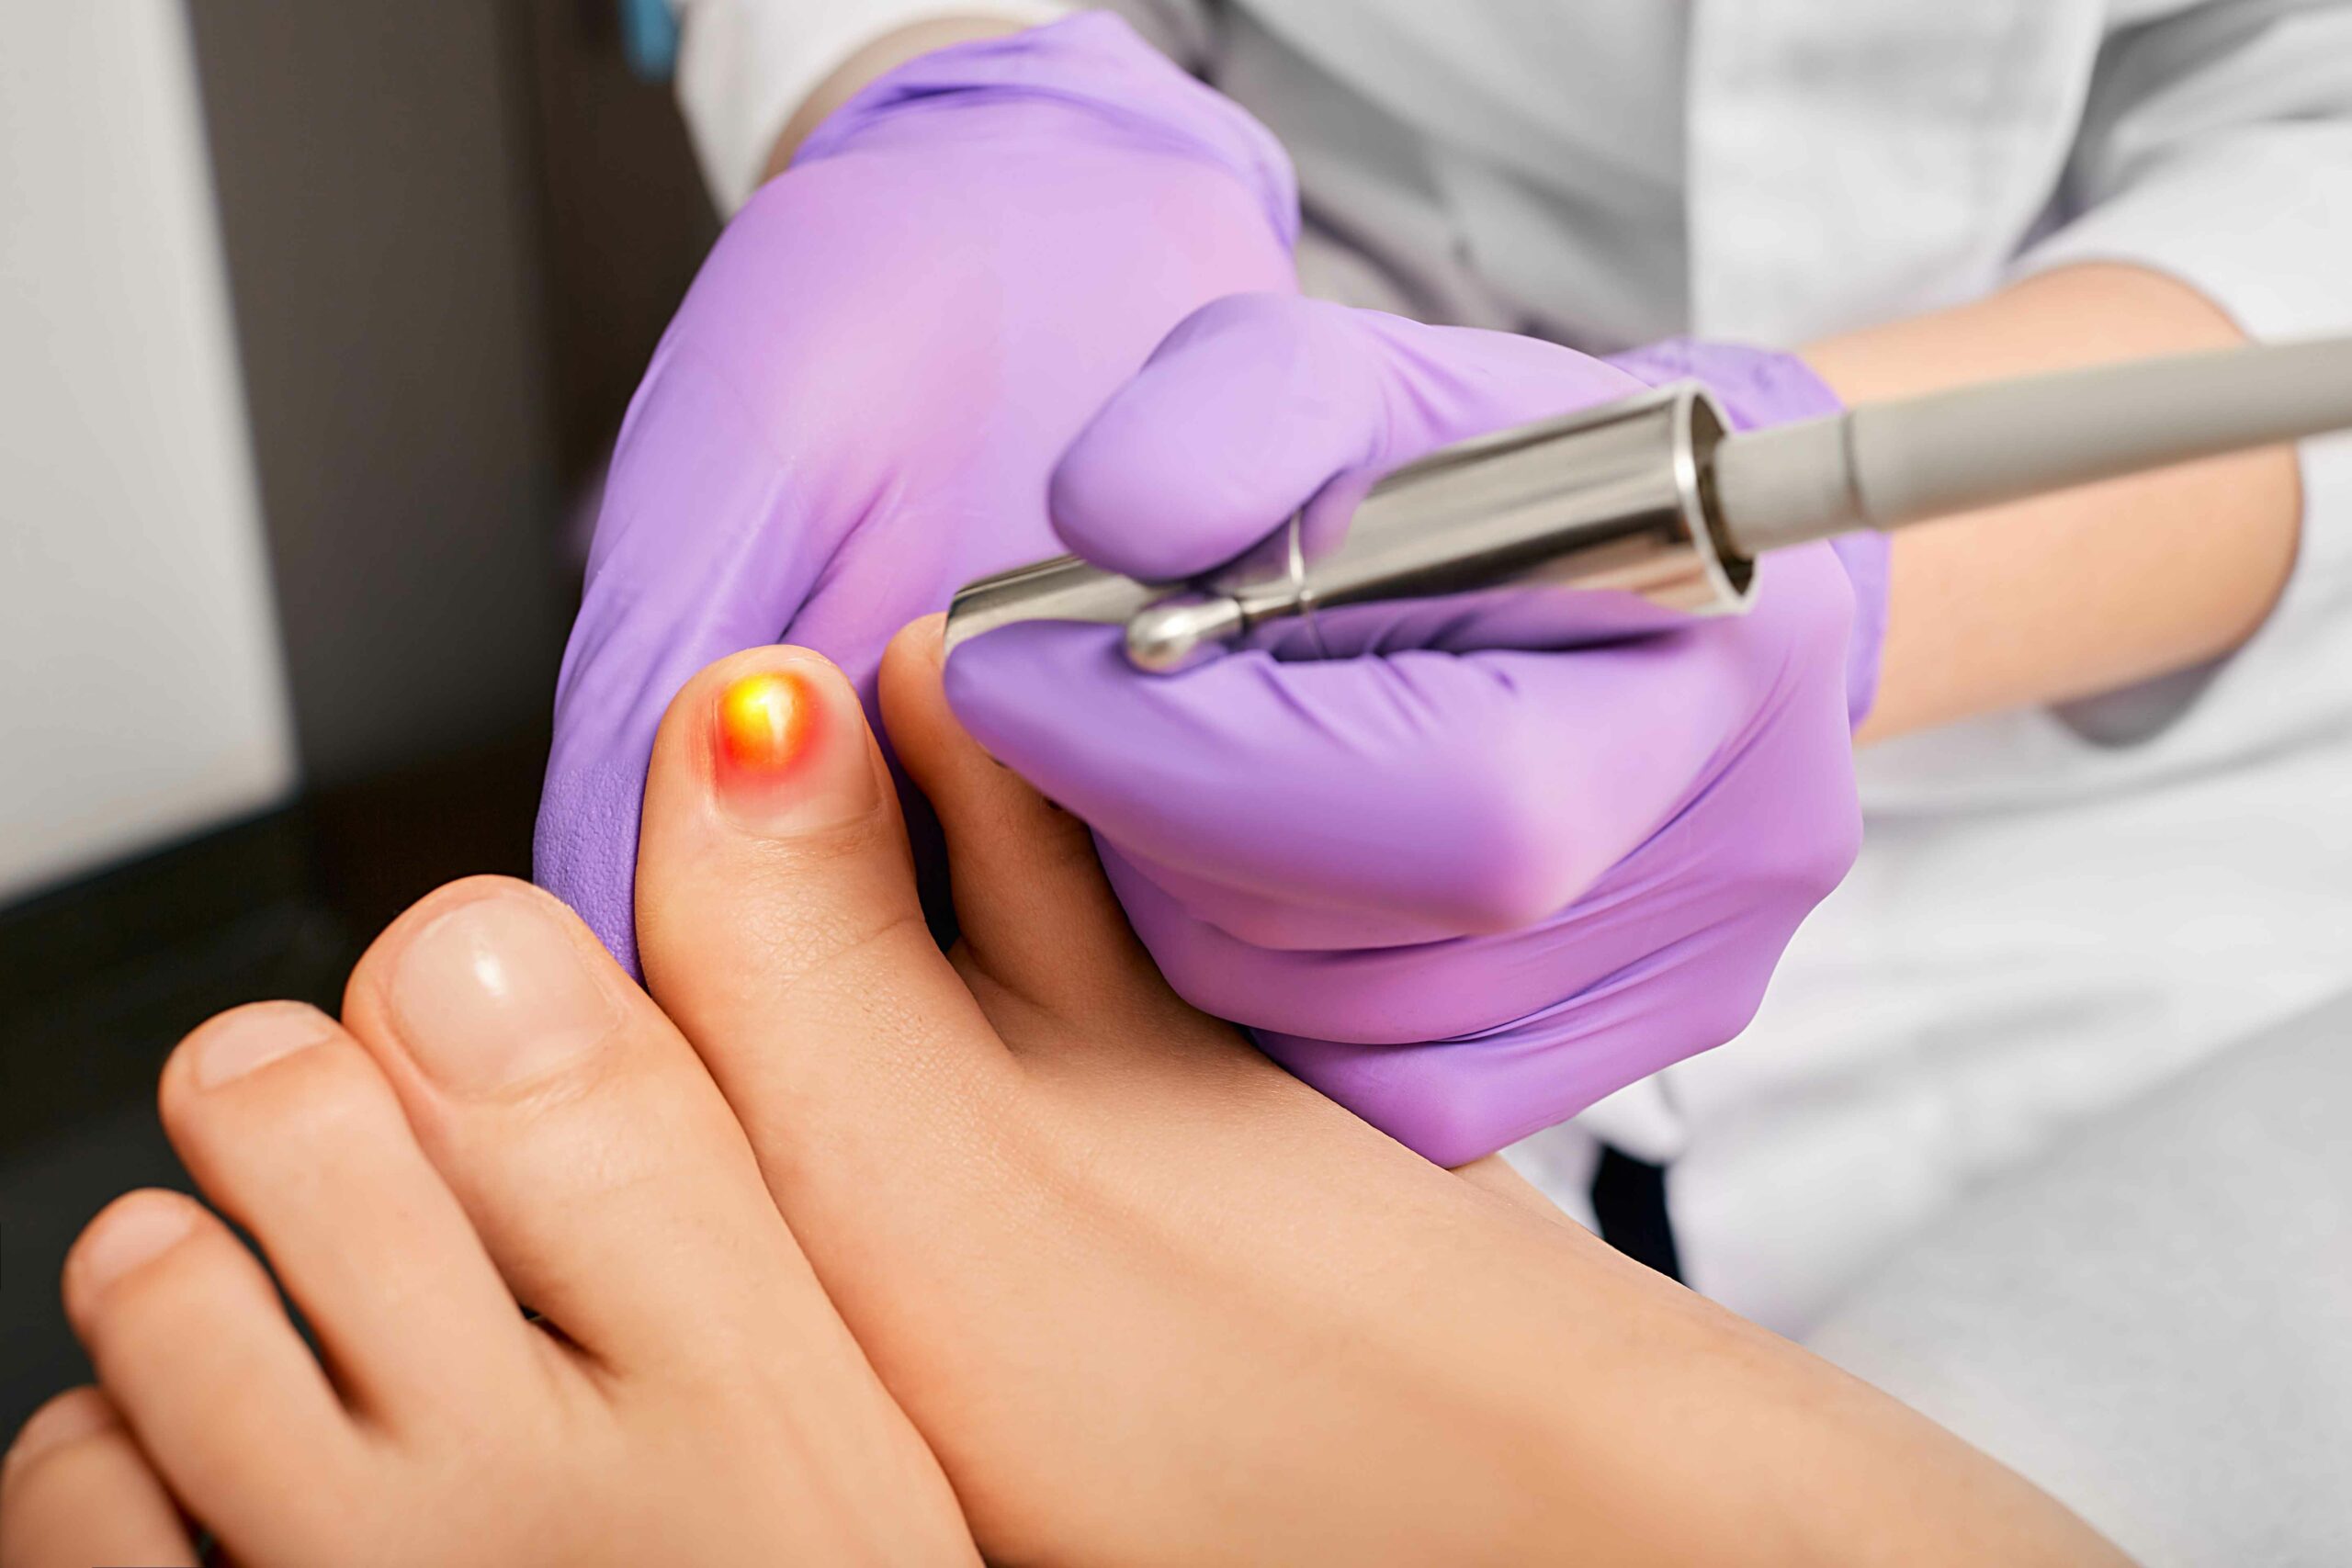 Laser Nail Fungus in Glendale, Encino, and Irvine, CA | New Look Skin Center Medical Spa in Glendale, Encino and Irvine, CA